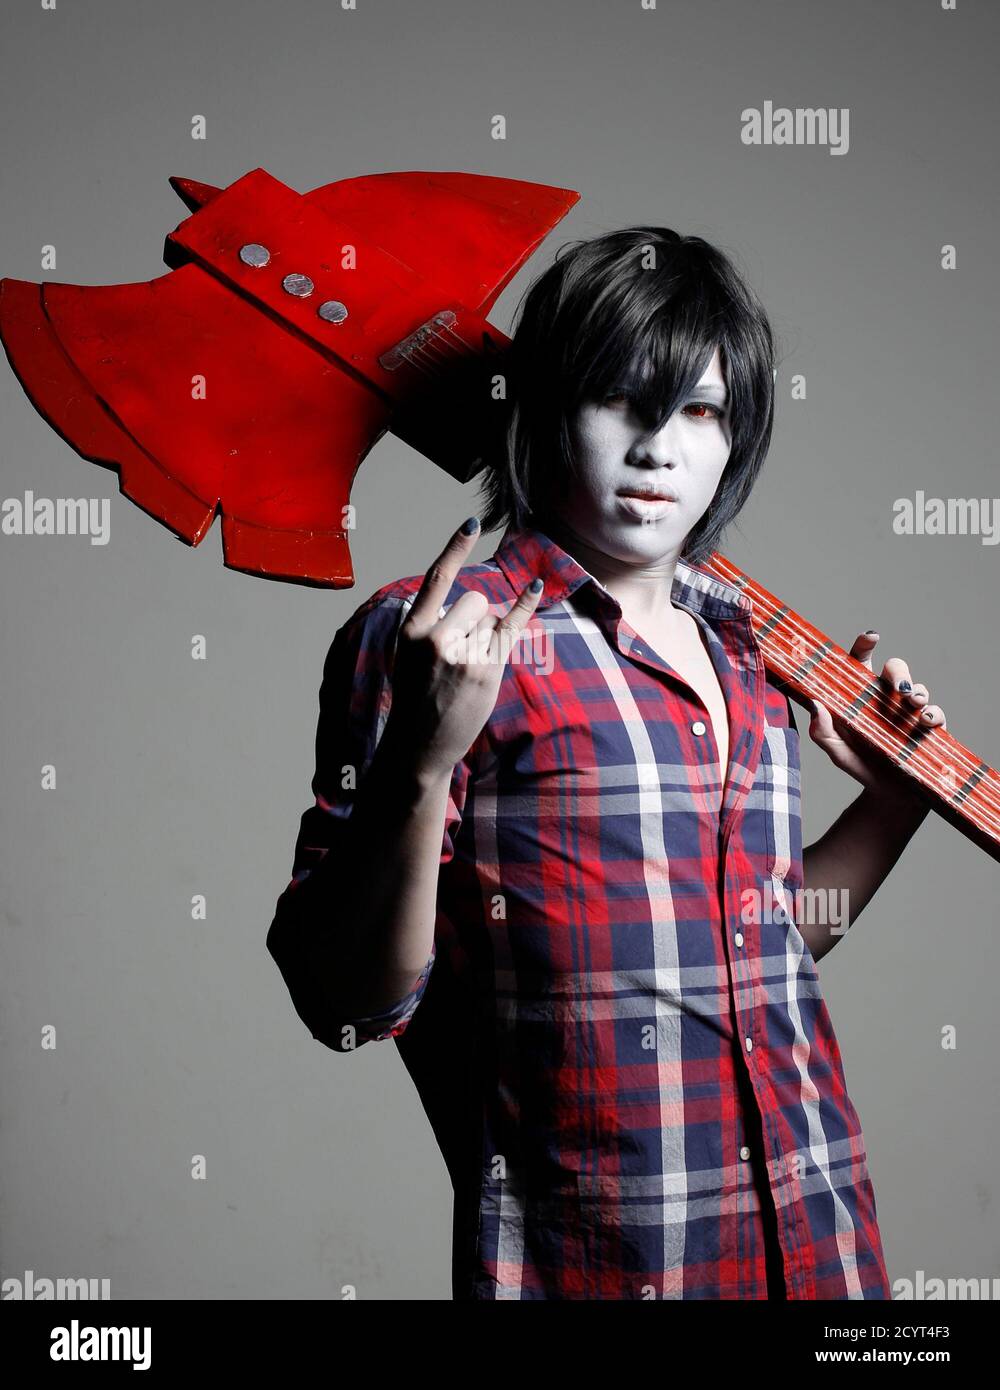 A cosplay enthusiast poses as Marshall Lee of the Adventure Time cartoon  series at the Singapore Toy, Game and Comic Convention September 1, 2013.  The convention featuring 157 exhibitors from 12 countries,